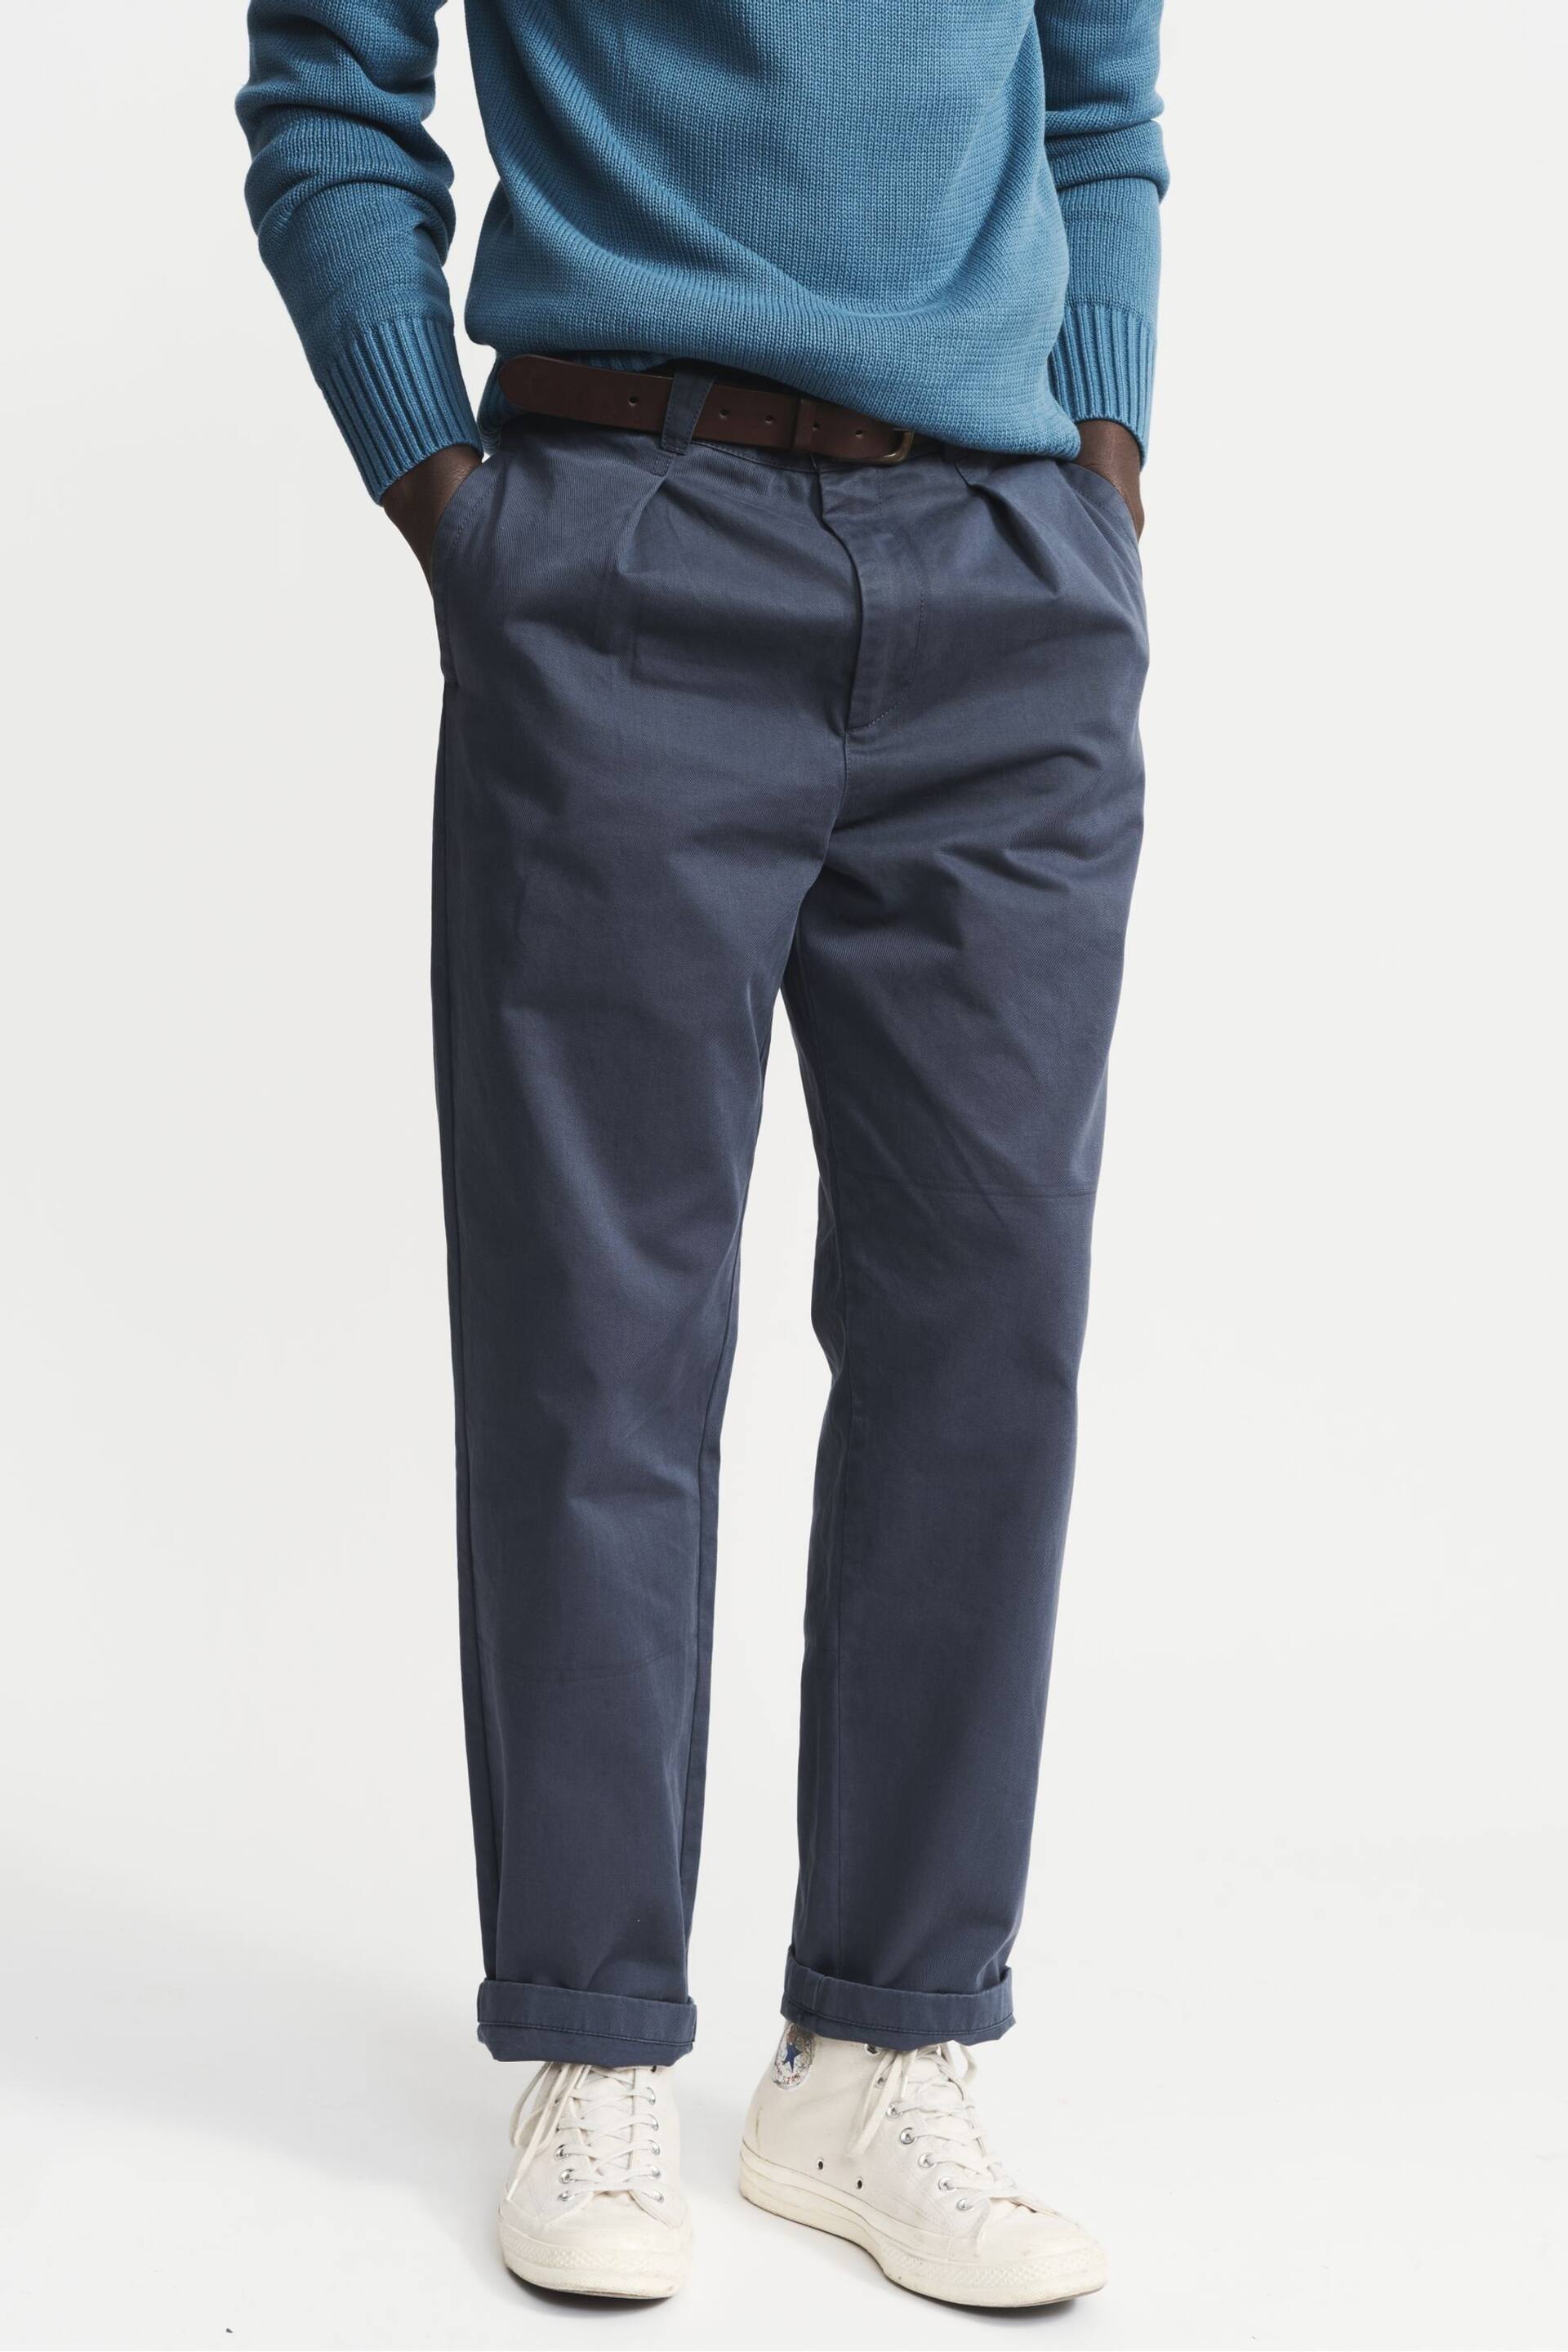 Aubin Barcombe Twill Trousers - Image 1 of 7